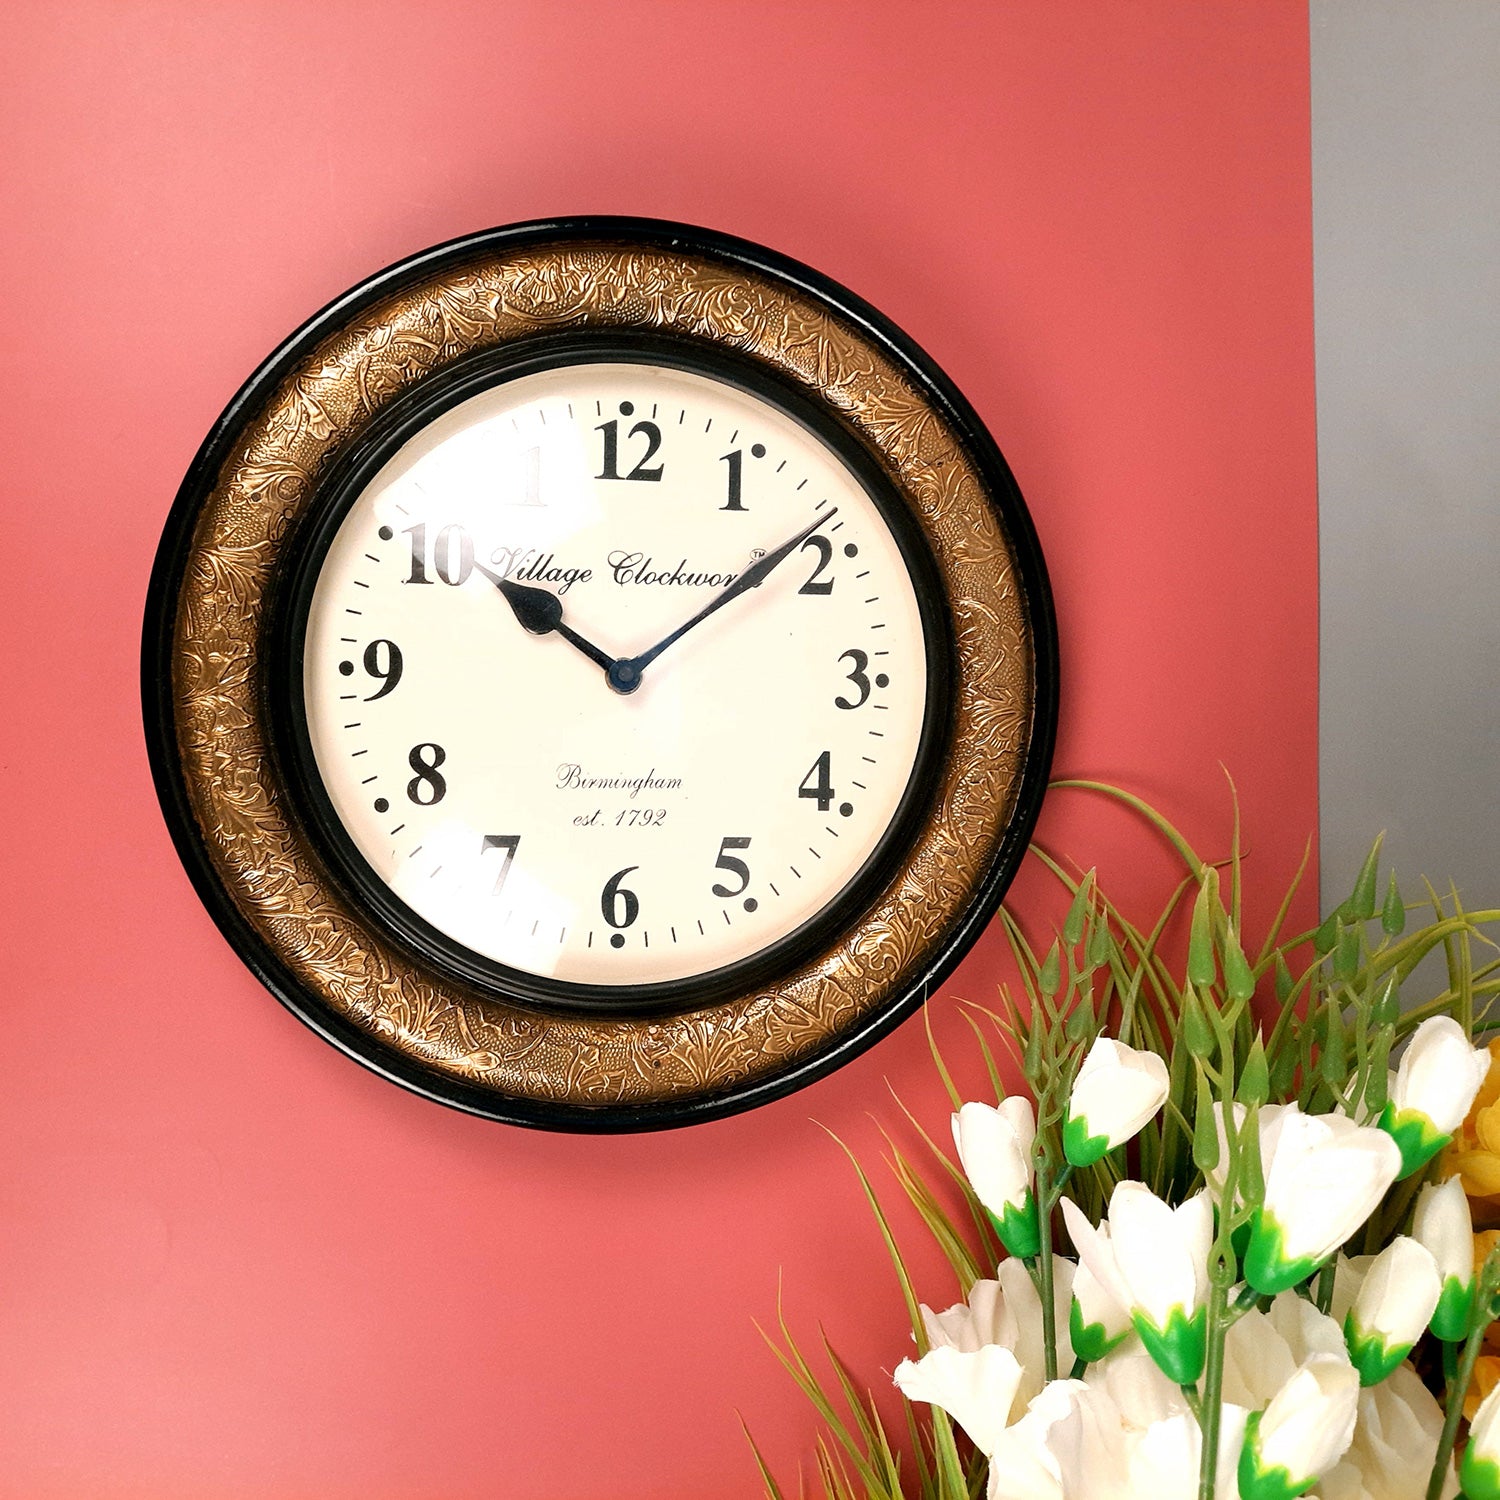 Wall Clock | Antique Clock Wall Mount With Premium Wood Finish & Brass Work - For Home, Living Room, Bedroom, Office & Hall Decoration | Wedding & Housewarming Gift - 12 inch - Apkamart